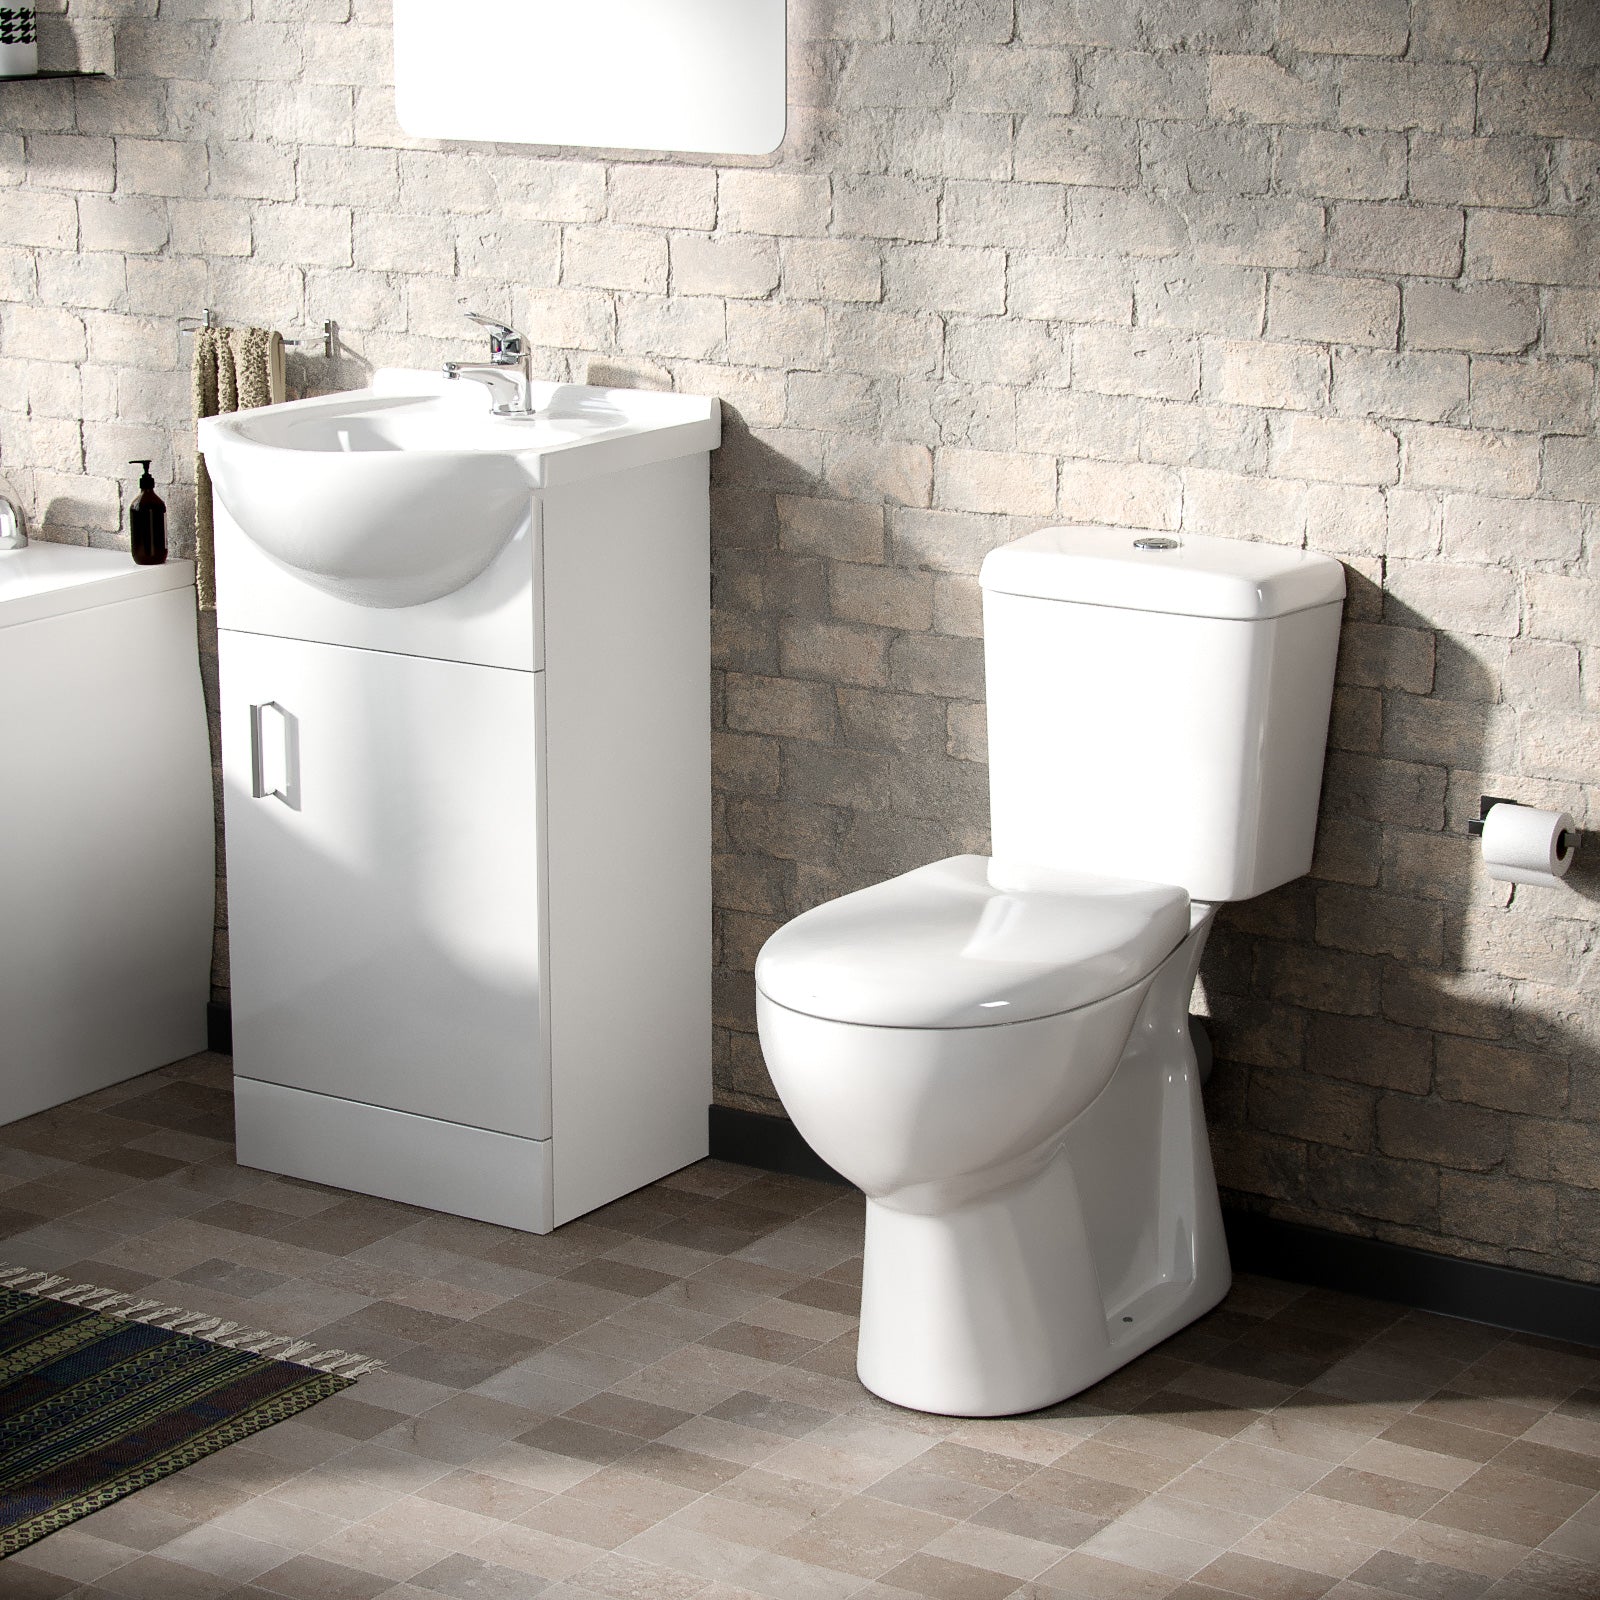 Nanuya Suite Set of 450mm White Basin Vanity and Close Coupled Toilet